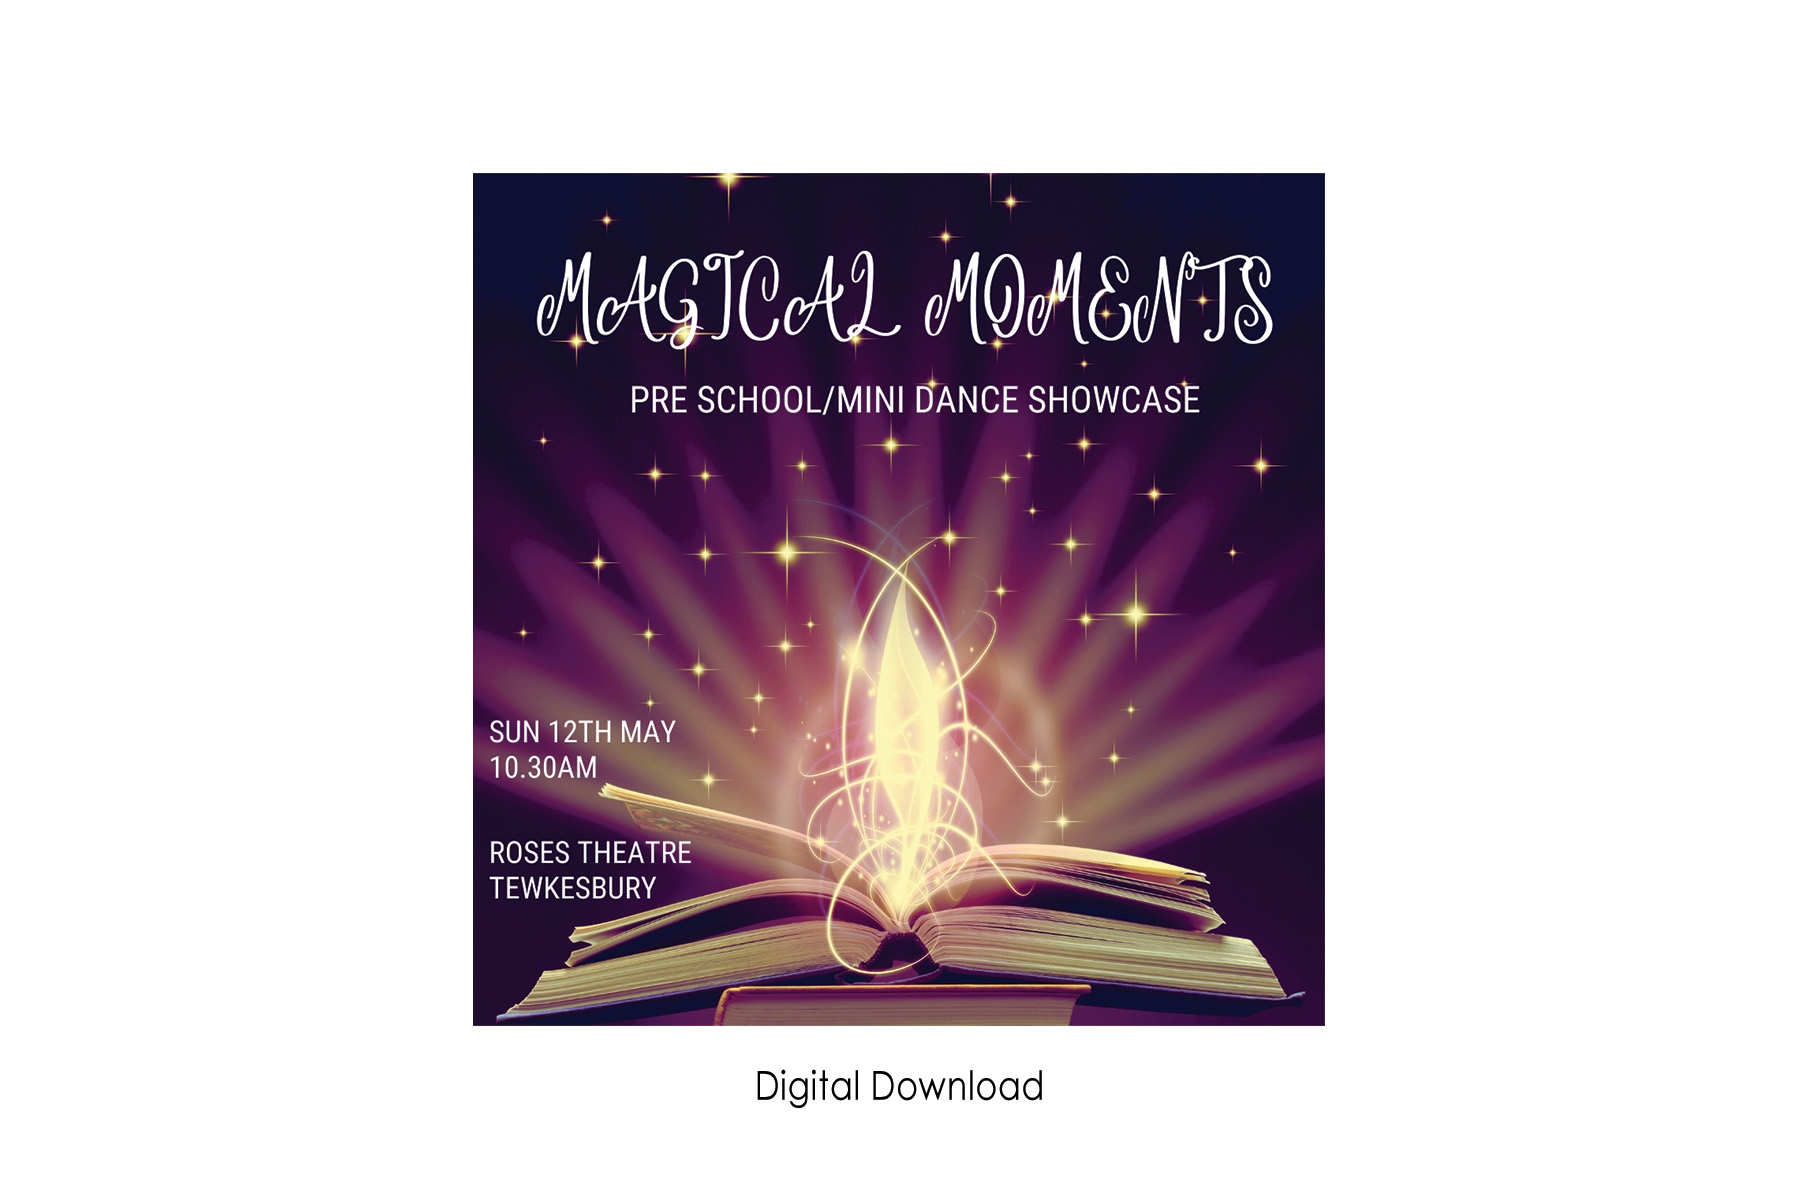 Dance in Motion Academy ‘Magical Moments’ – DIGITAL DOWNLOAD